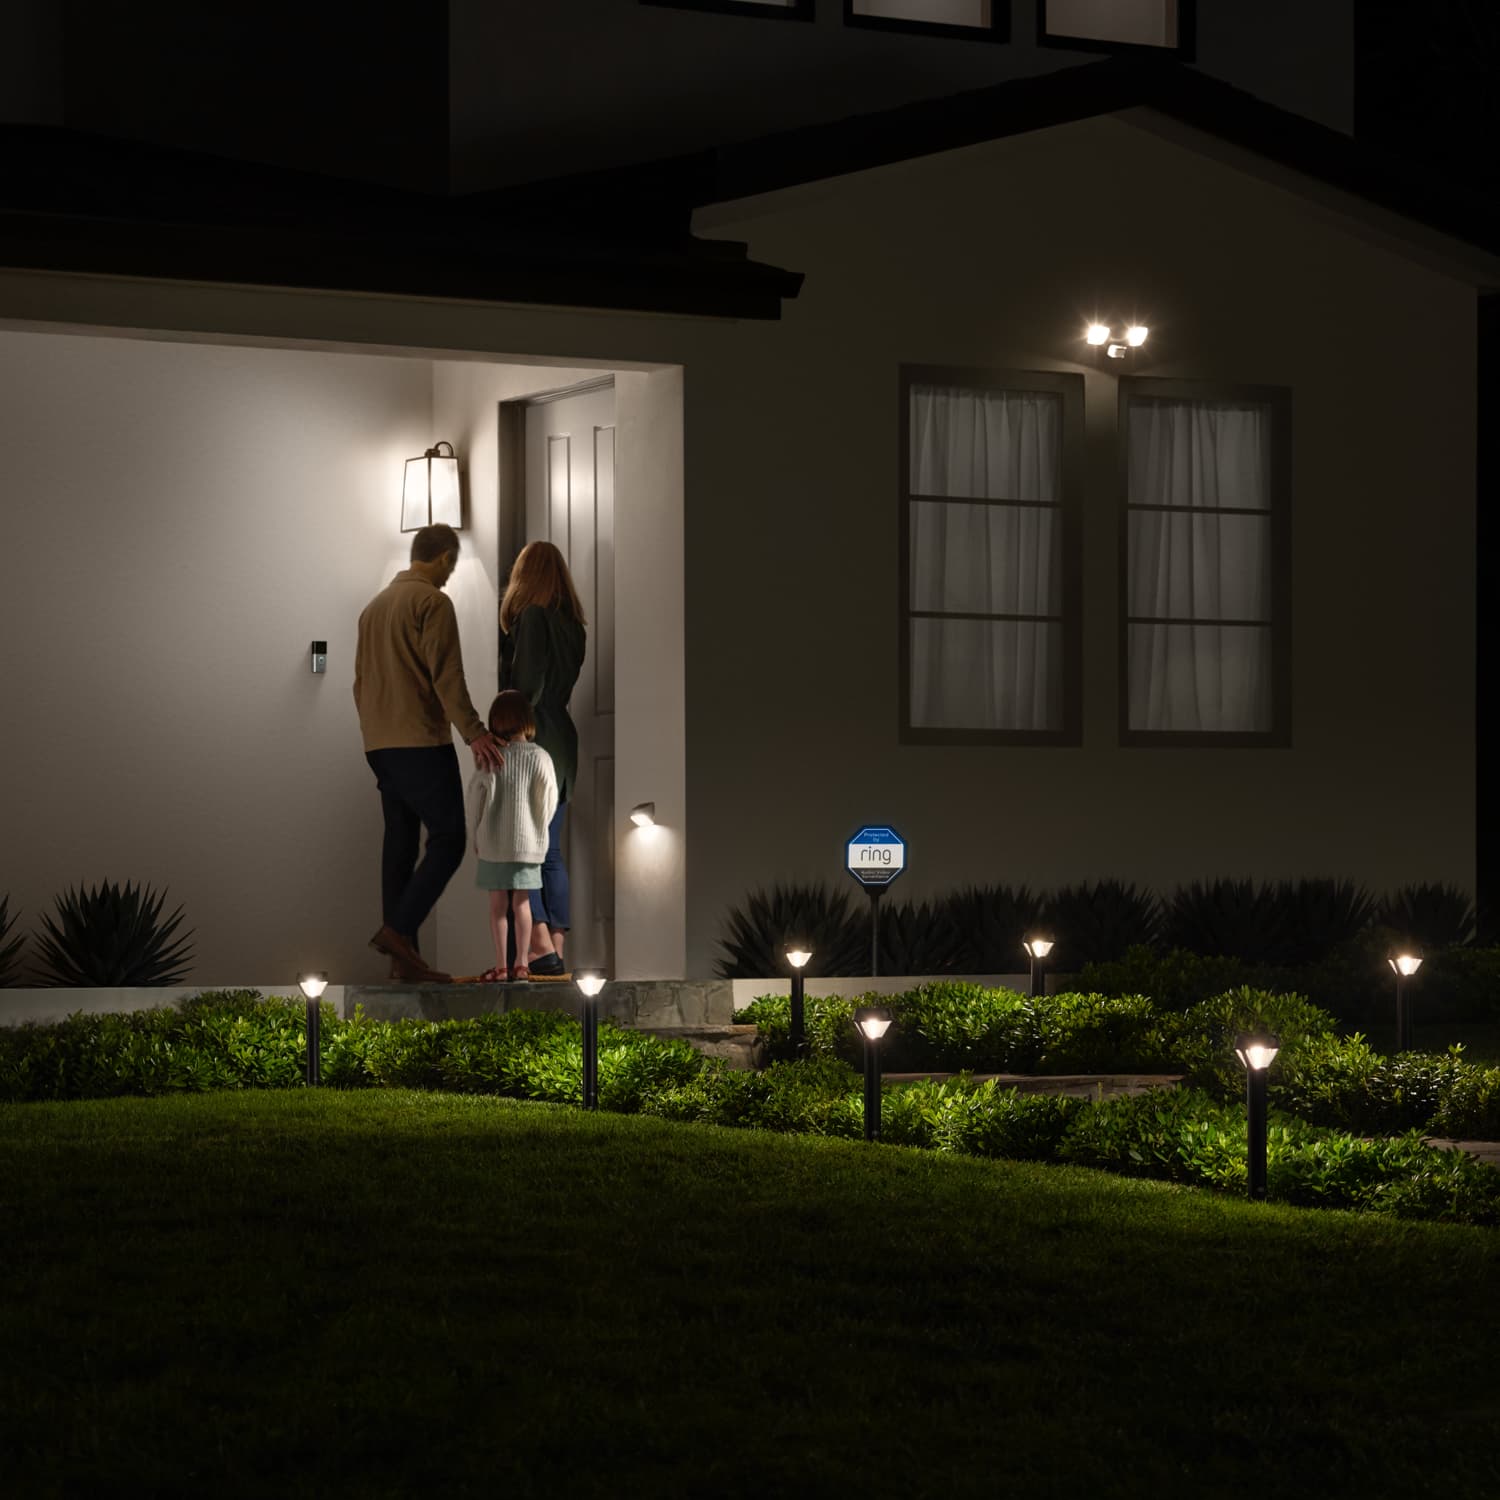 Smart Lighting Solar Pathlight - Outdoors at night, a family approaches the front door of a home. The pathway is illuminated by Solar Pathlights.